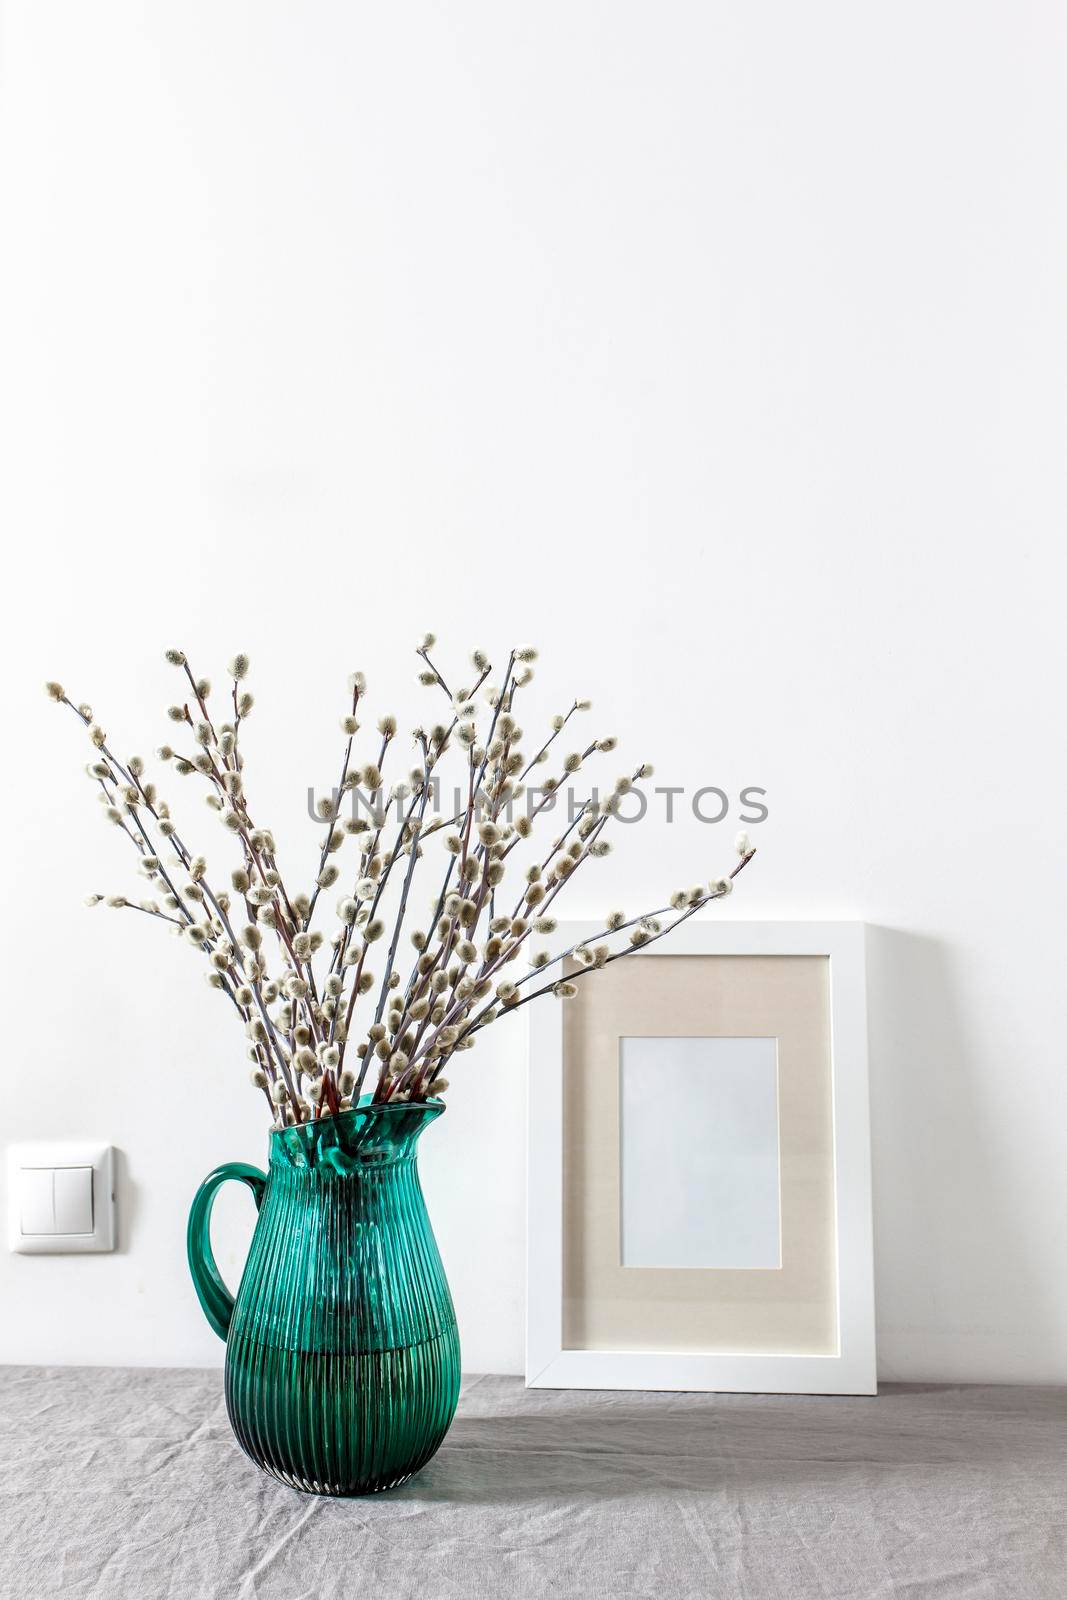 Blank canvas frame mockup. Artwork in interior design. View of modern style interior with canvas for poster on wall. Living room, table with green pitcher with willow branches. minimalism concept by elenarostunova